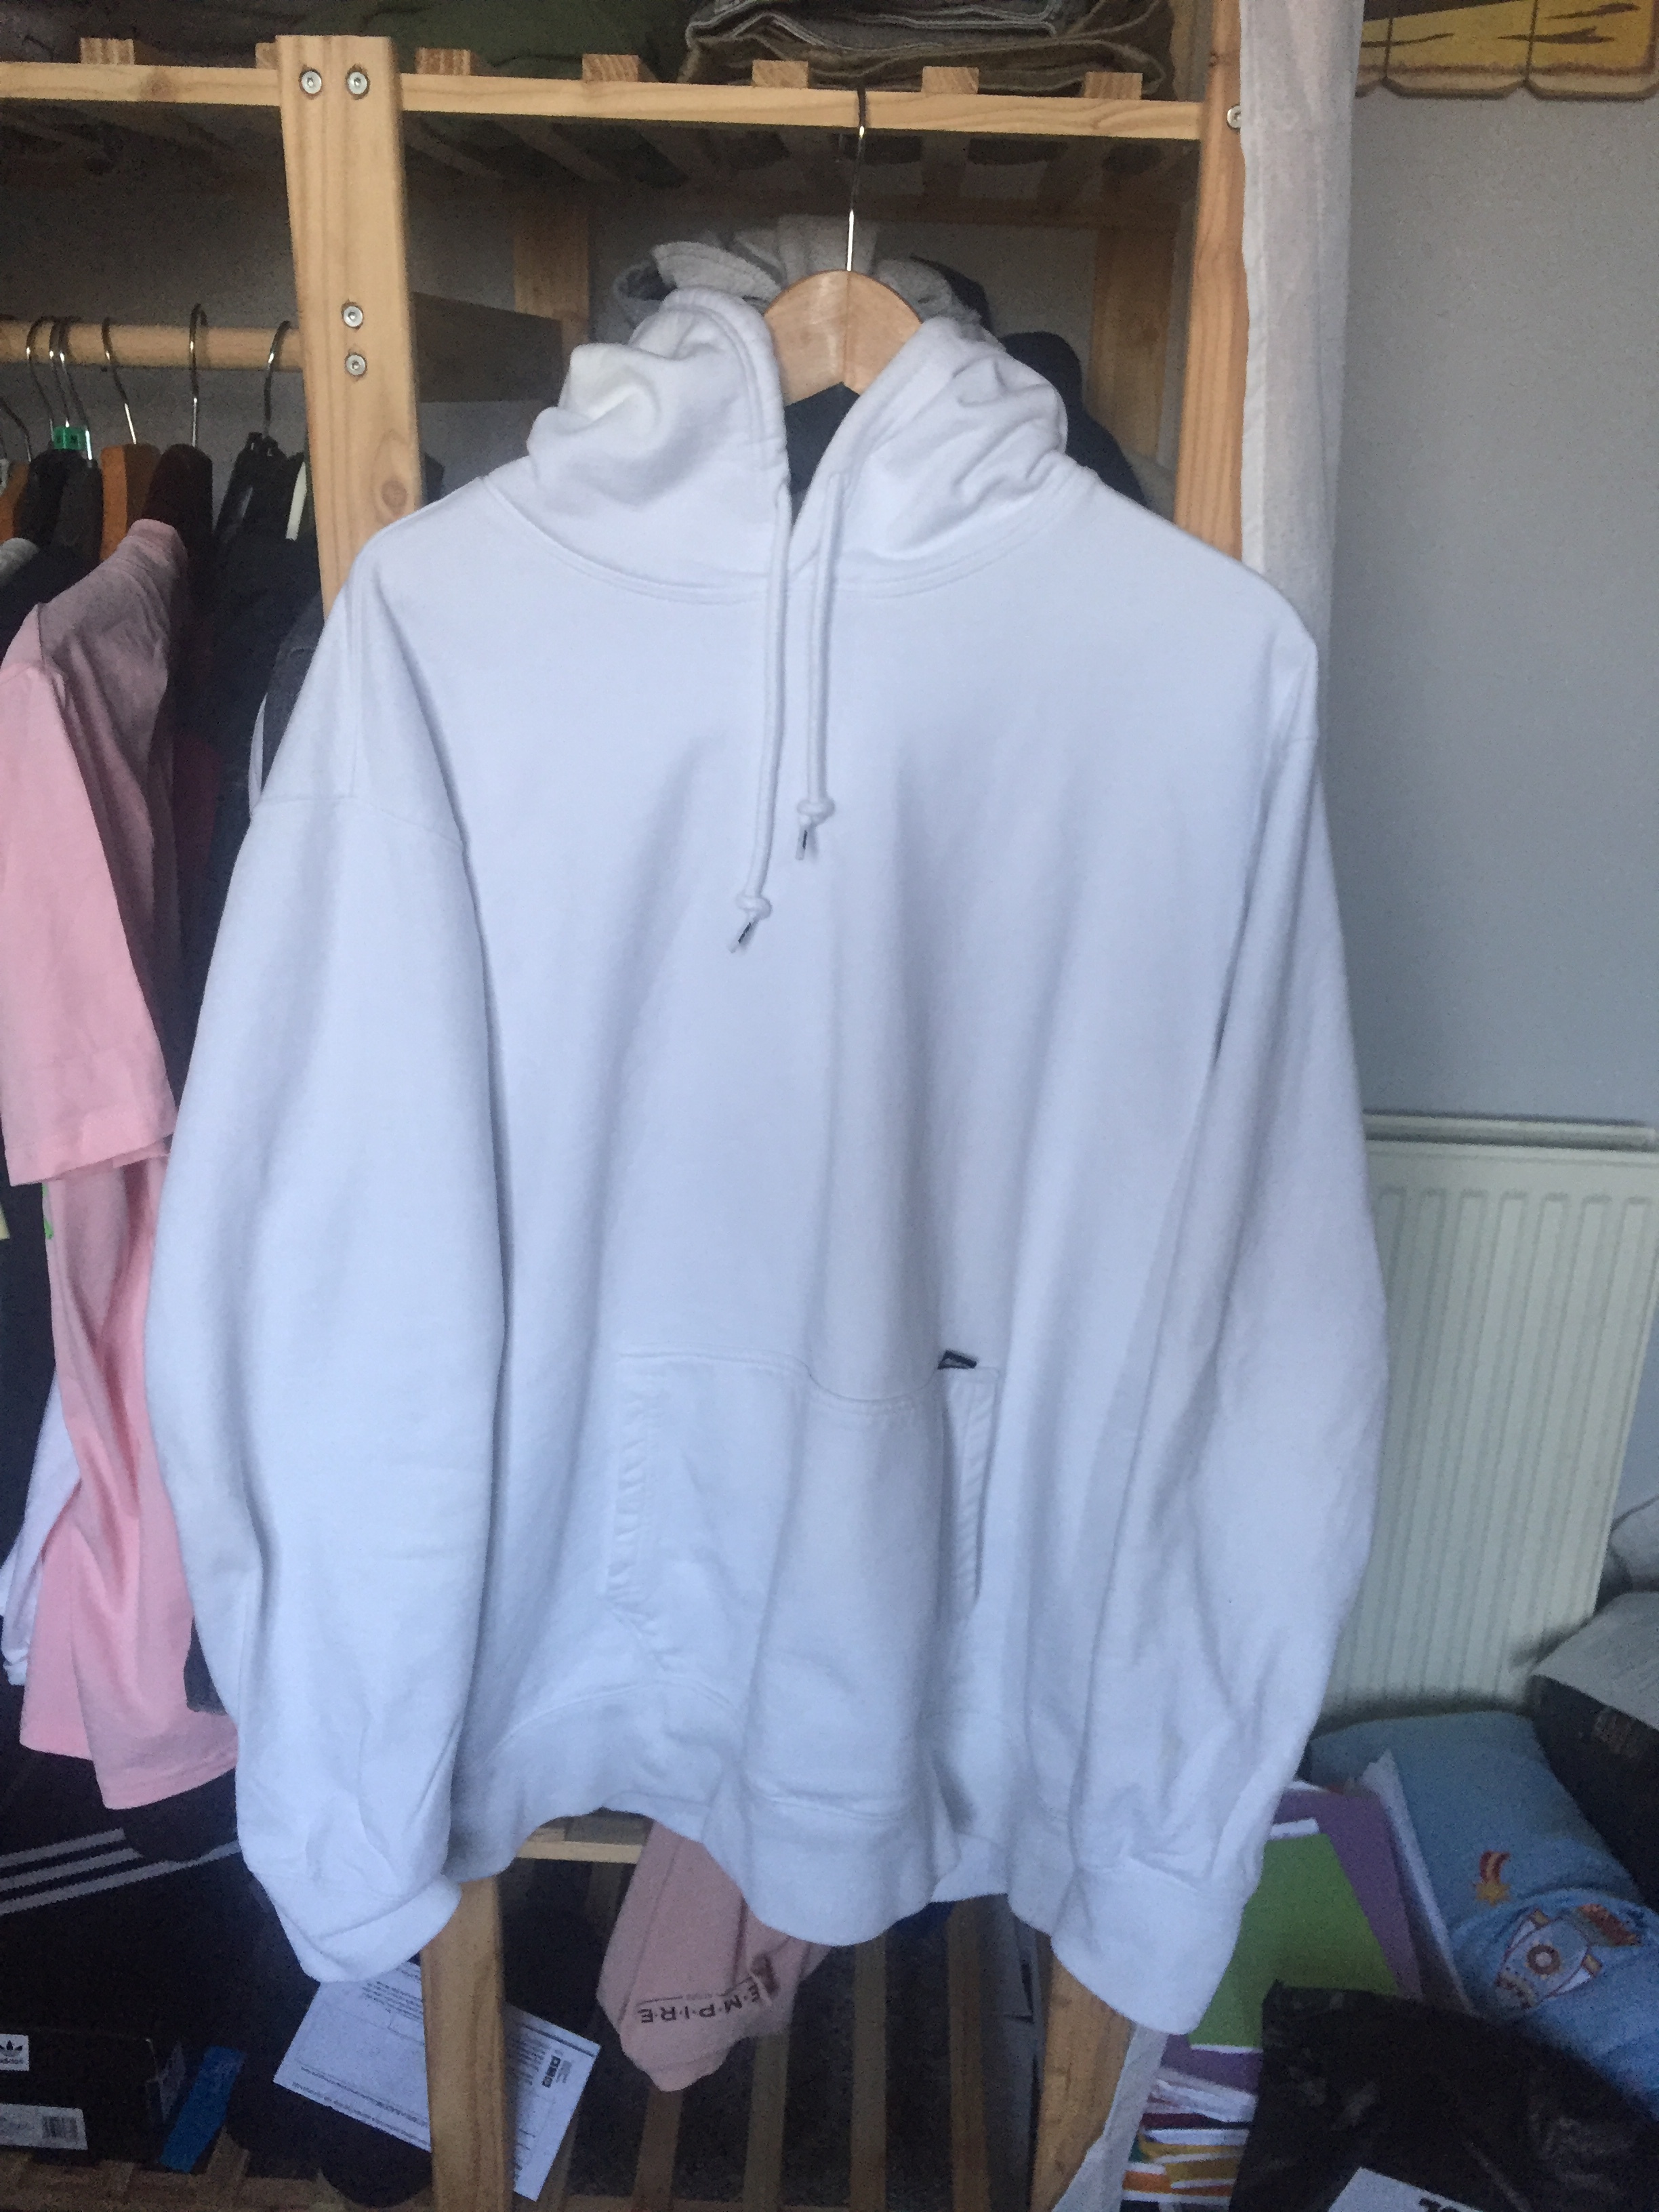 Palace Hoodie XL Available for Free Online Swapping :: Rehash